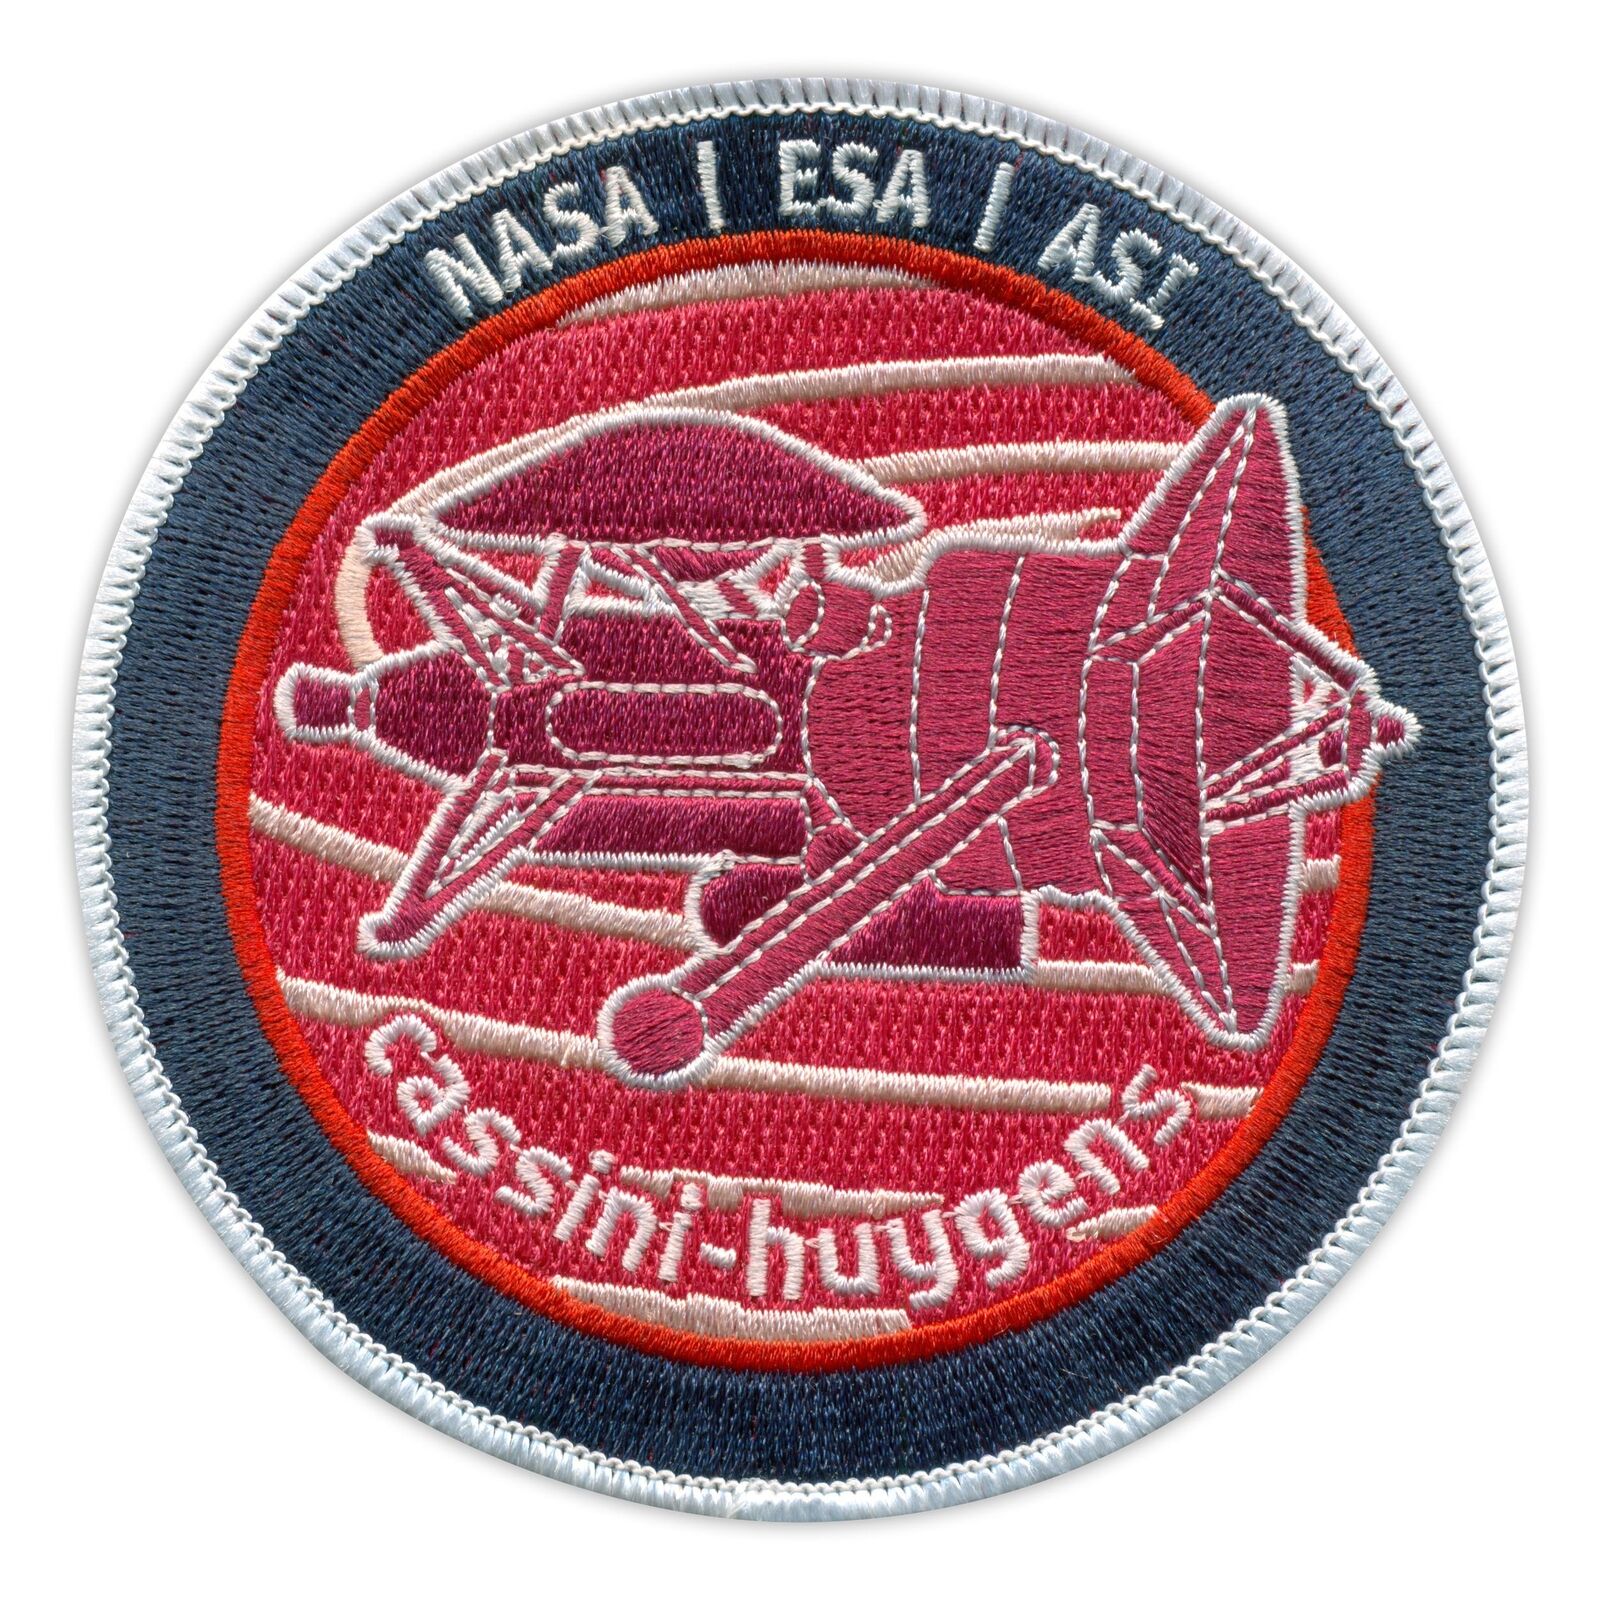 cassini-huygens NASA ESA ASI Patch/Badge Embroidered